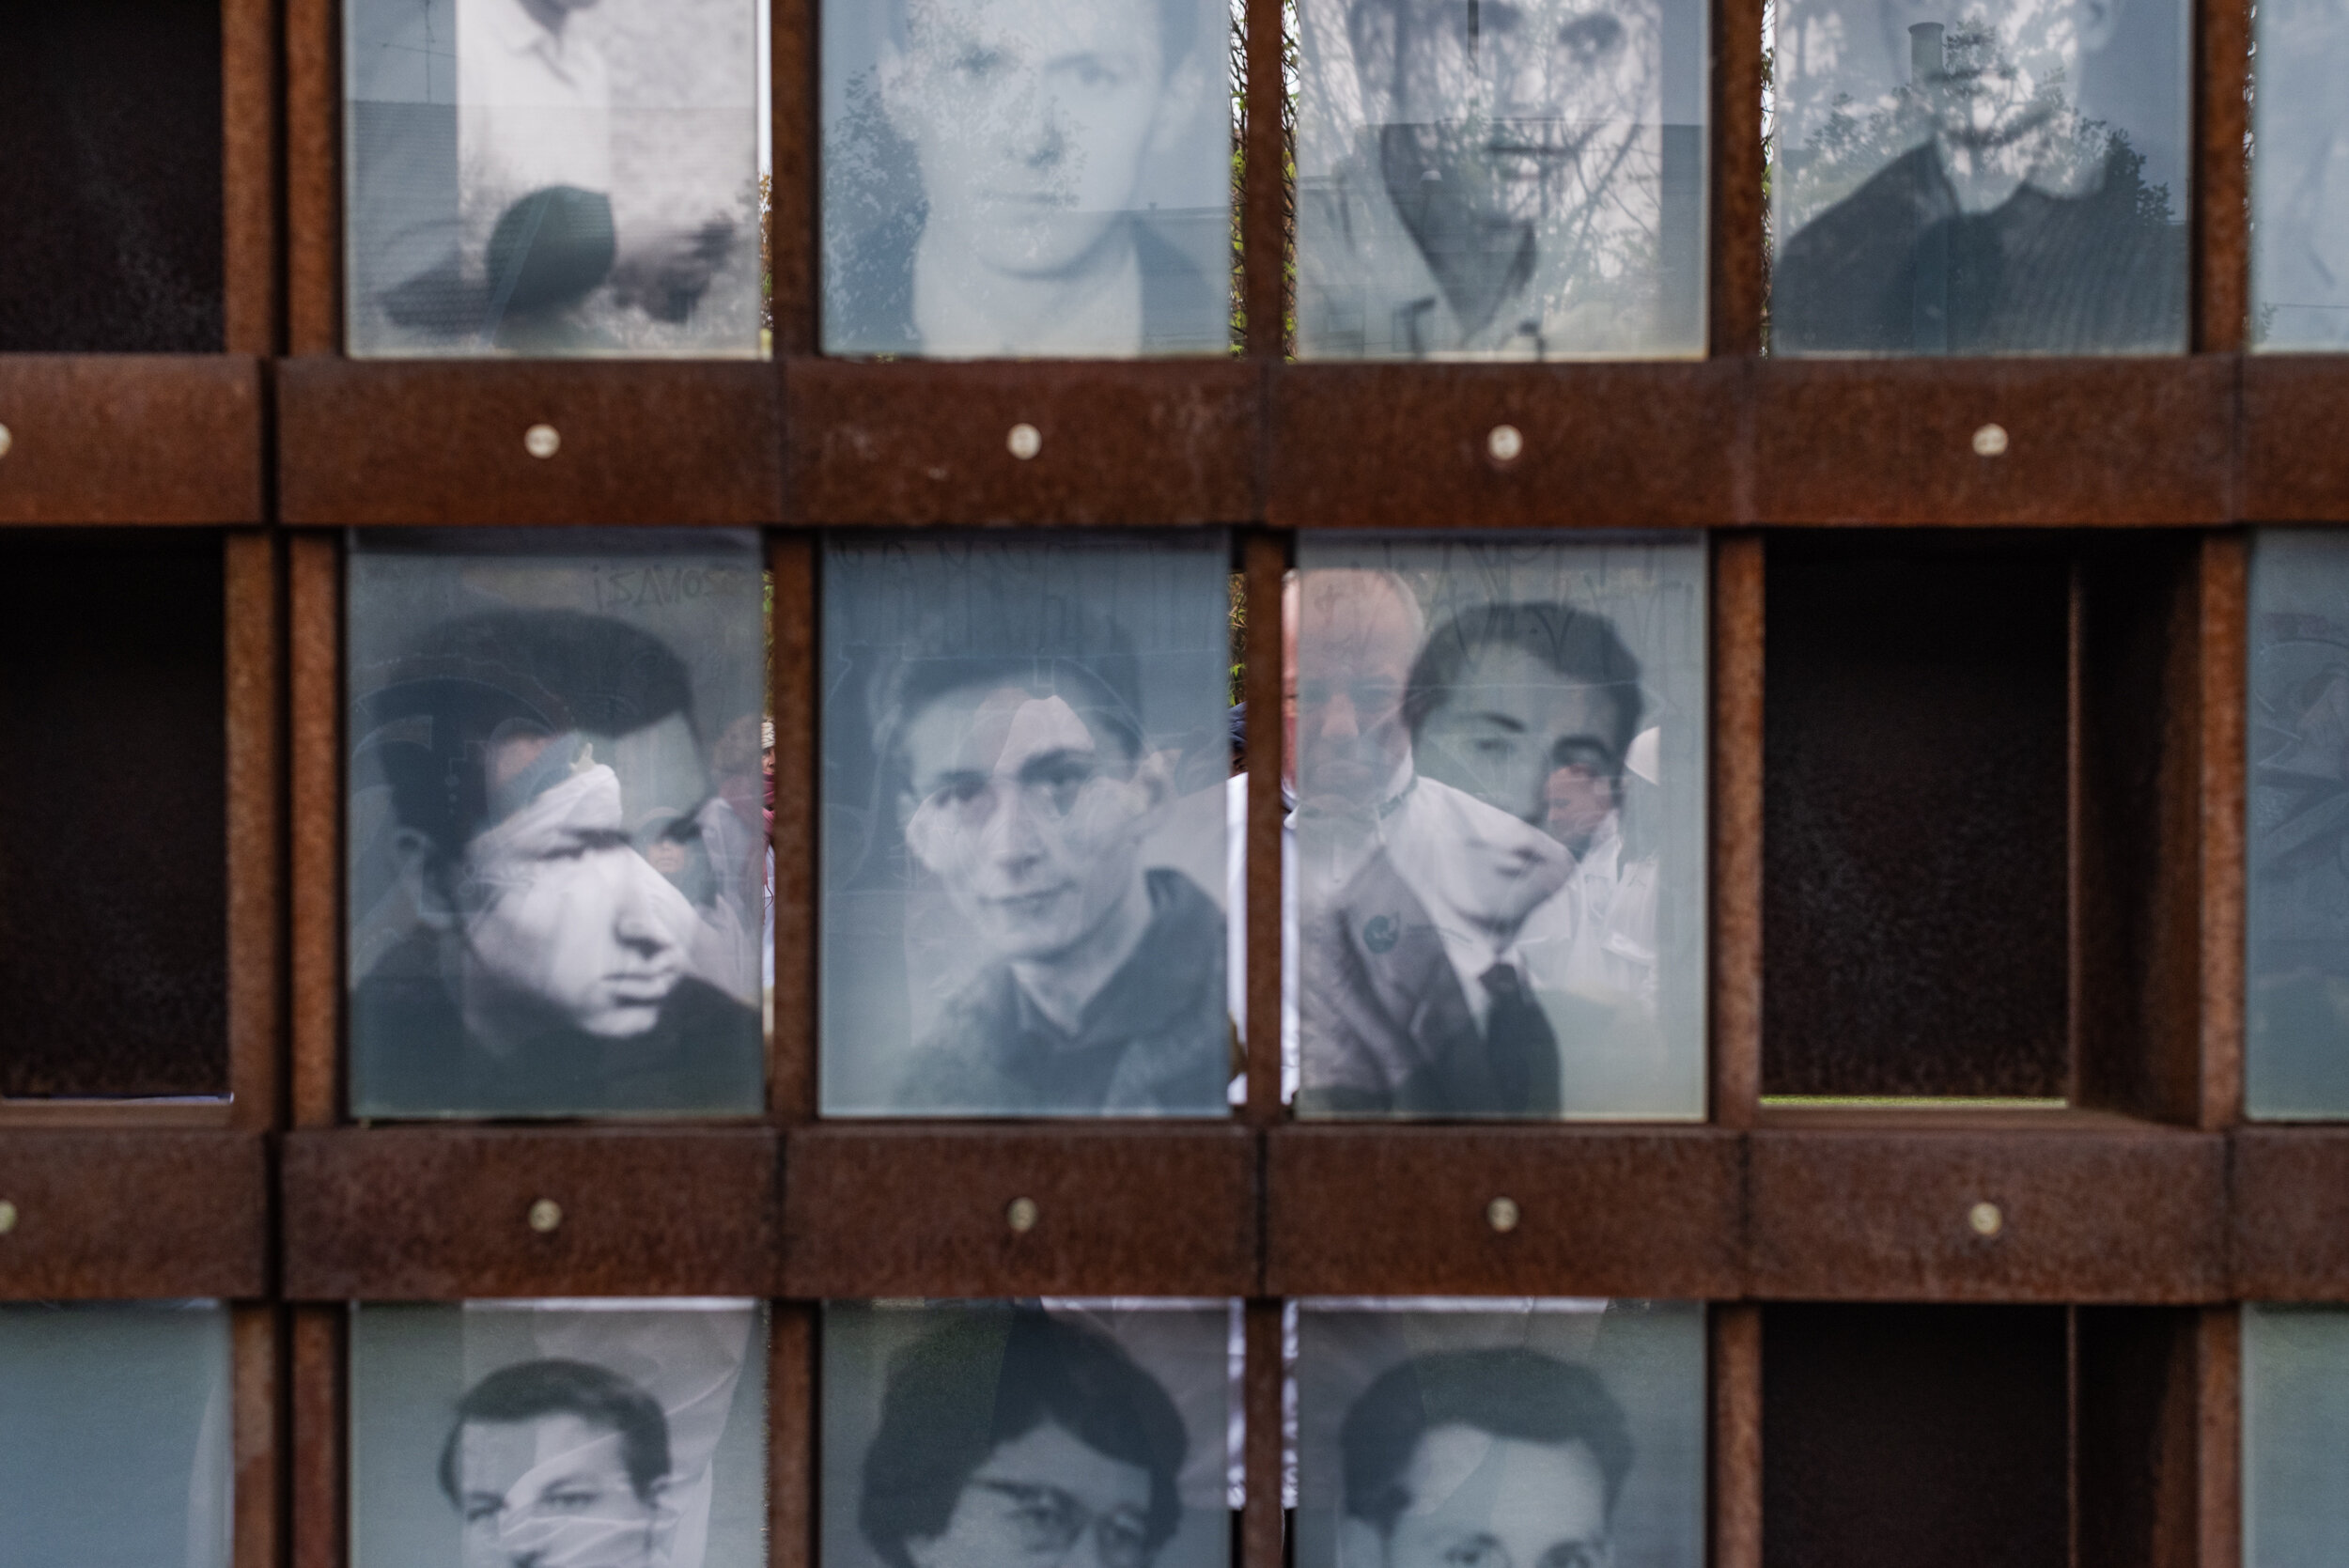  Faces of victims of a divided era on the memorial of the Wall. 